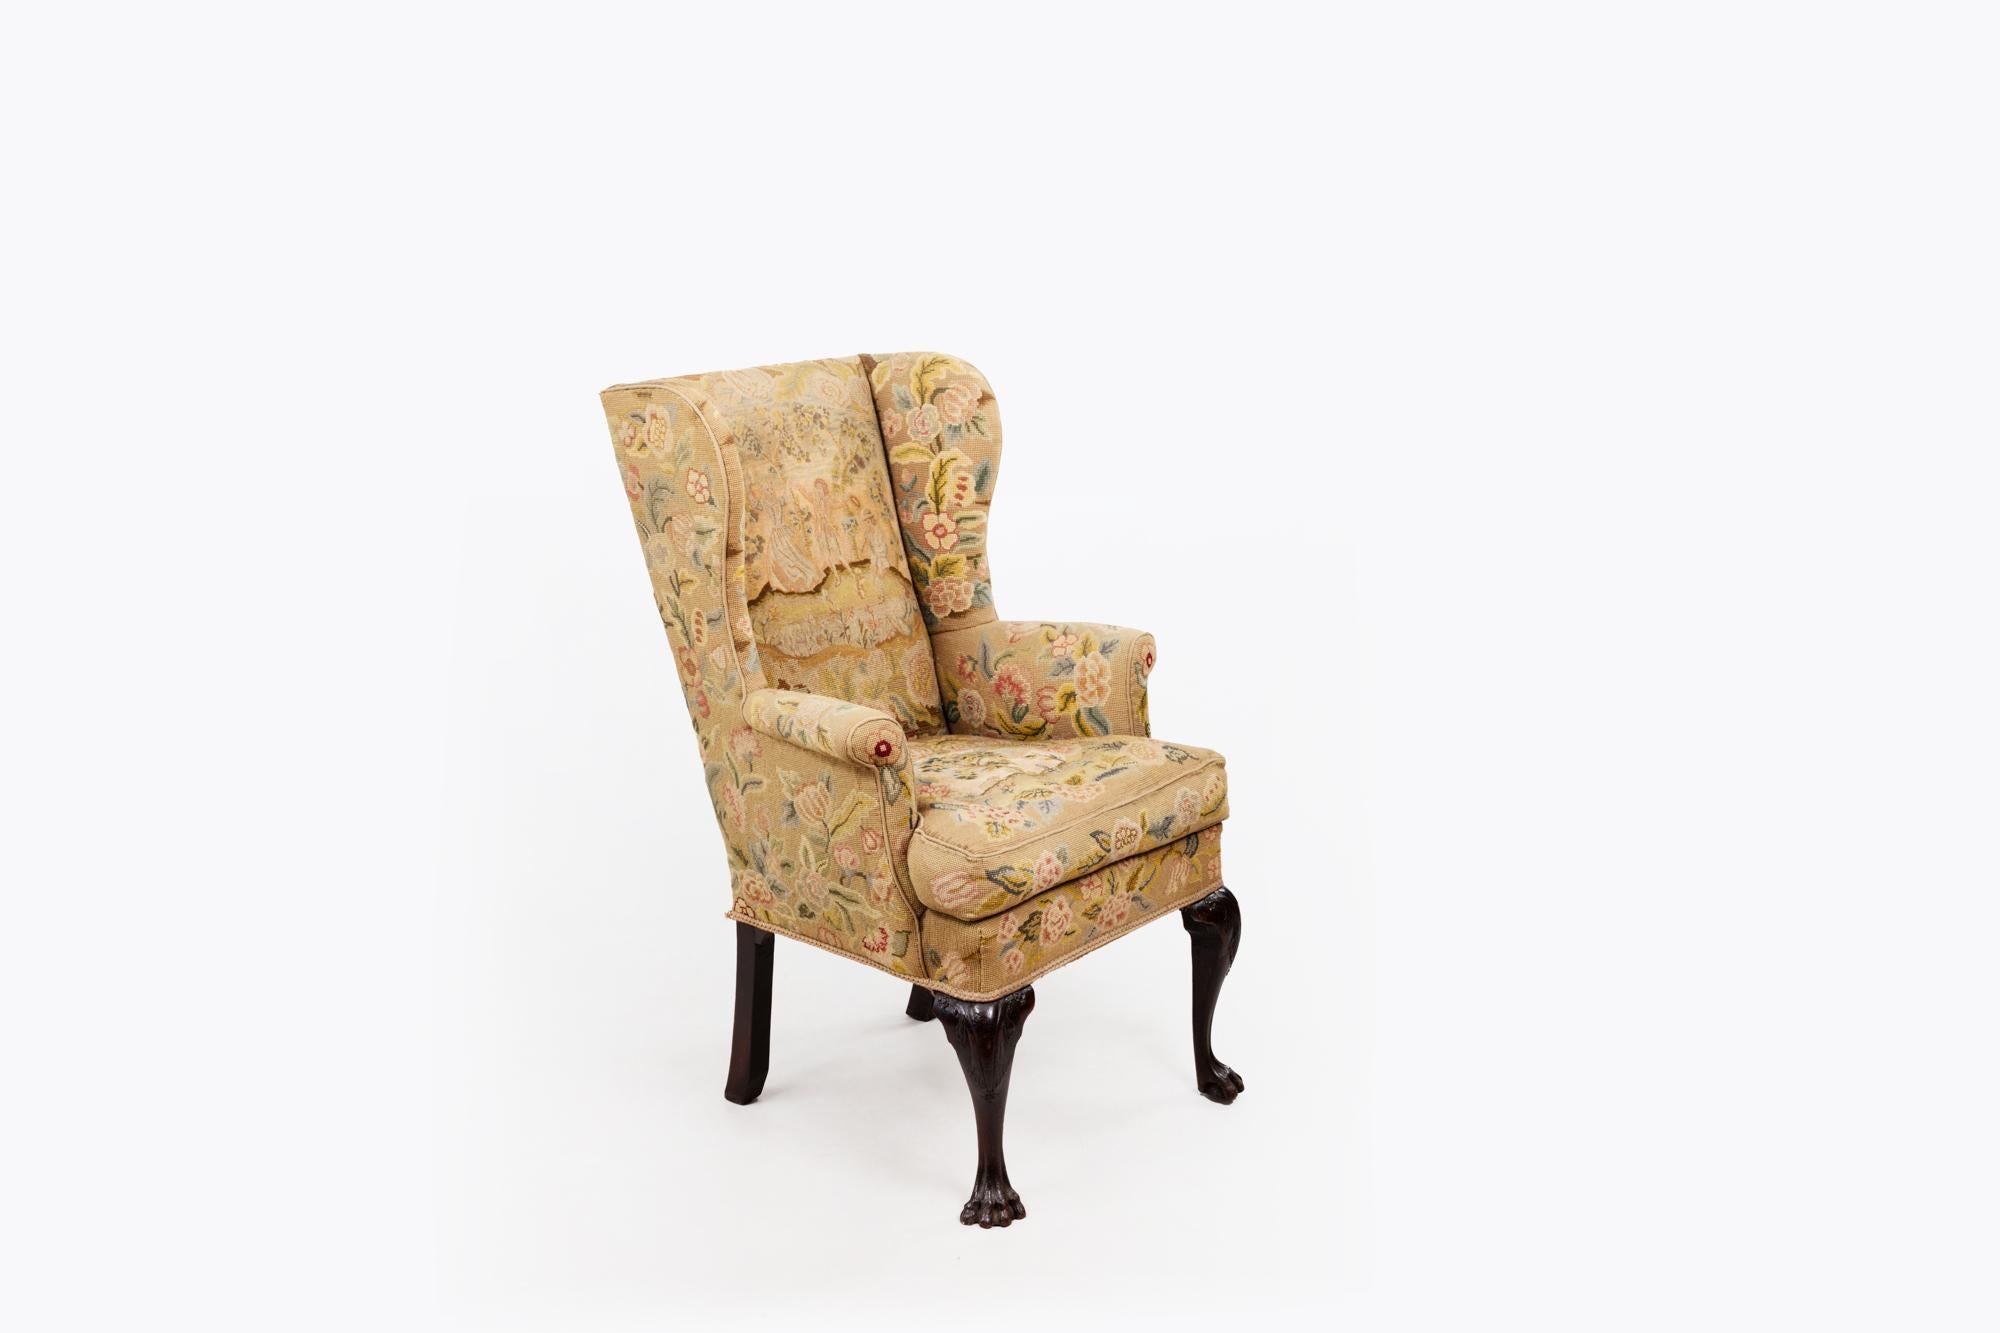 18th Century Irish George II wingback armchair featuring carved cabriole legs terminating in lion paw feet to the front, and simple legs to the back. The chair is covered in needlework upholstery depicting country scenes and floral garlands.